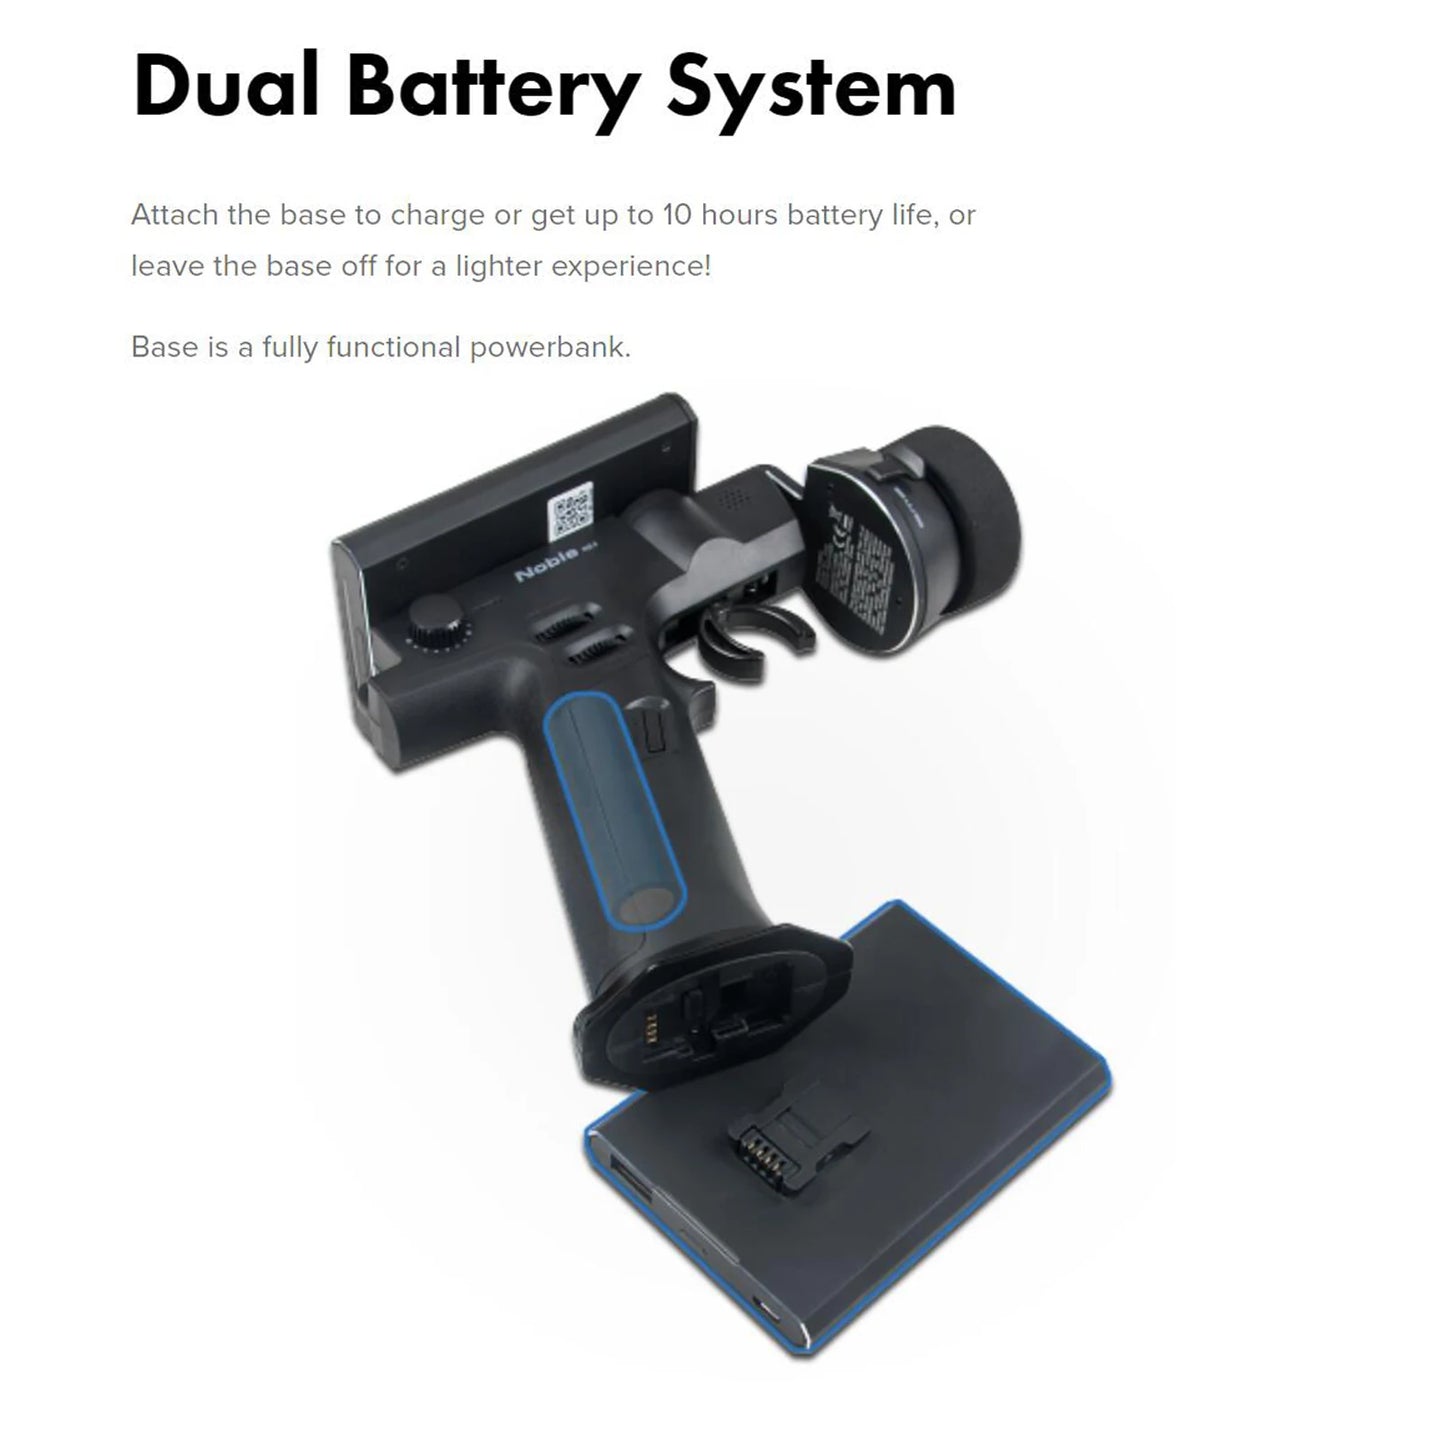 Dual Battery System Attach the base to charge or up to 10 hours battery life, or leave the